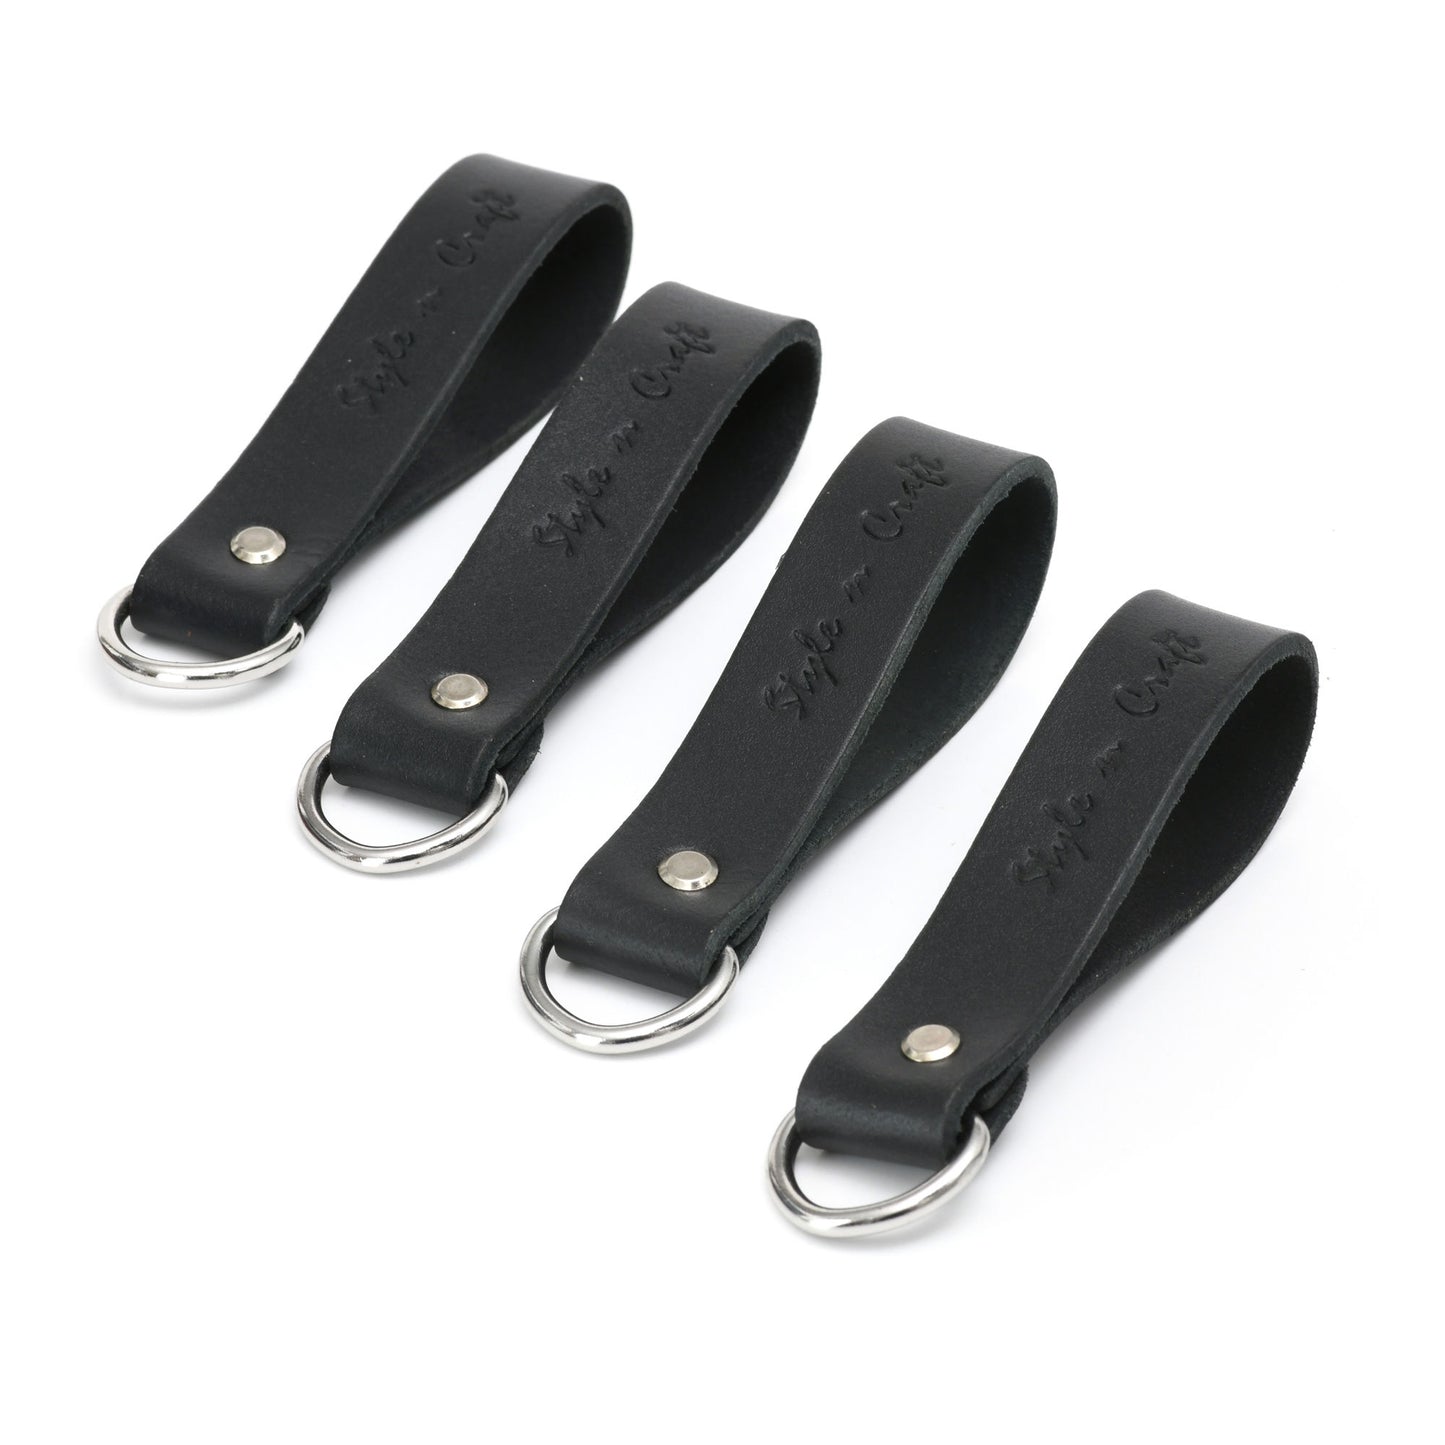 Style n Craft 75202 - Leather D-Ring Loop Set (4 Pcs) for Suspender Attachment in Black Color  - Front Angled View. Each Set Contains 4 Leather Loops